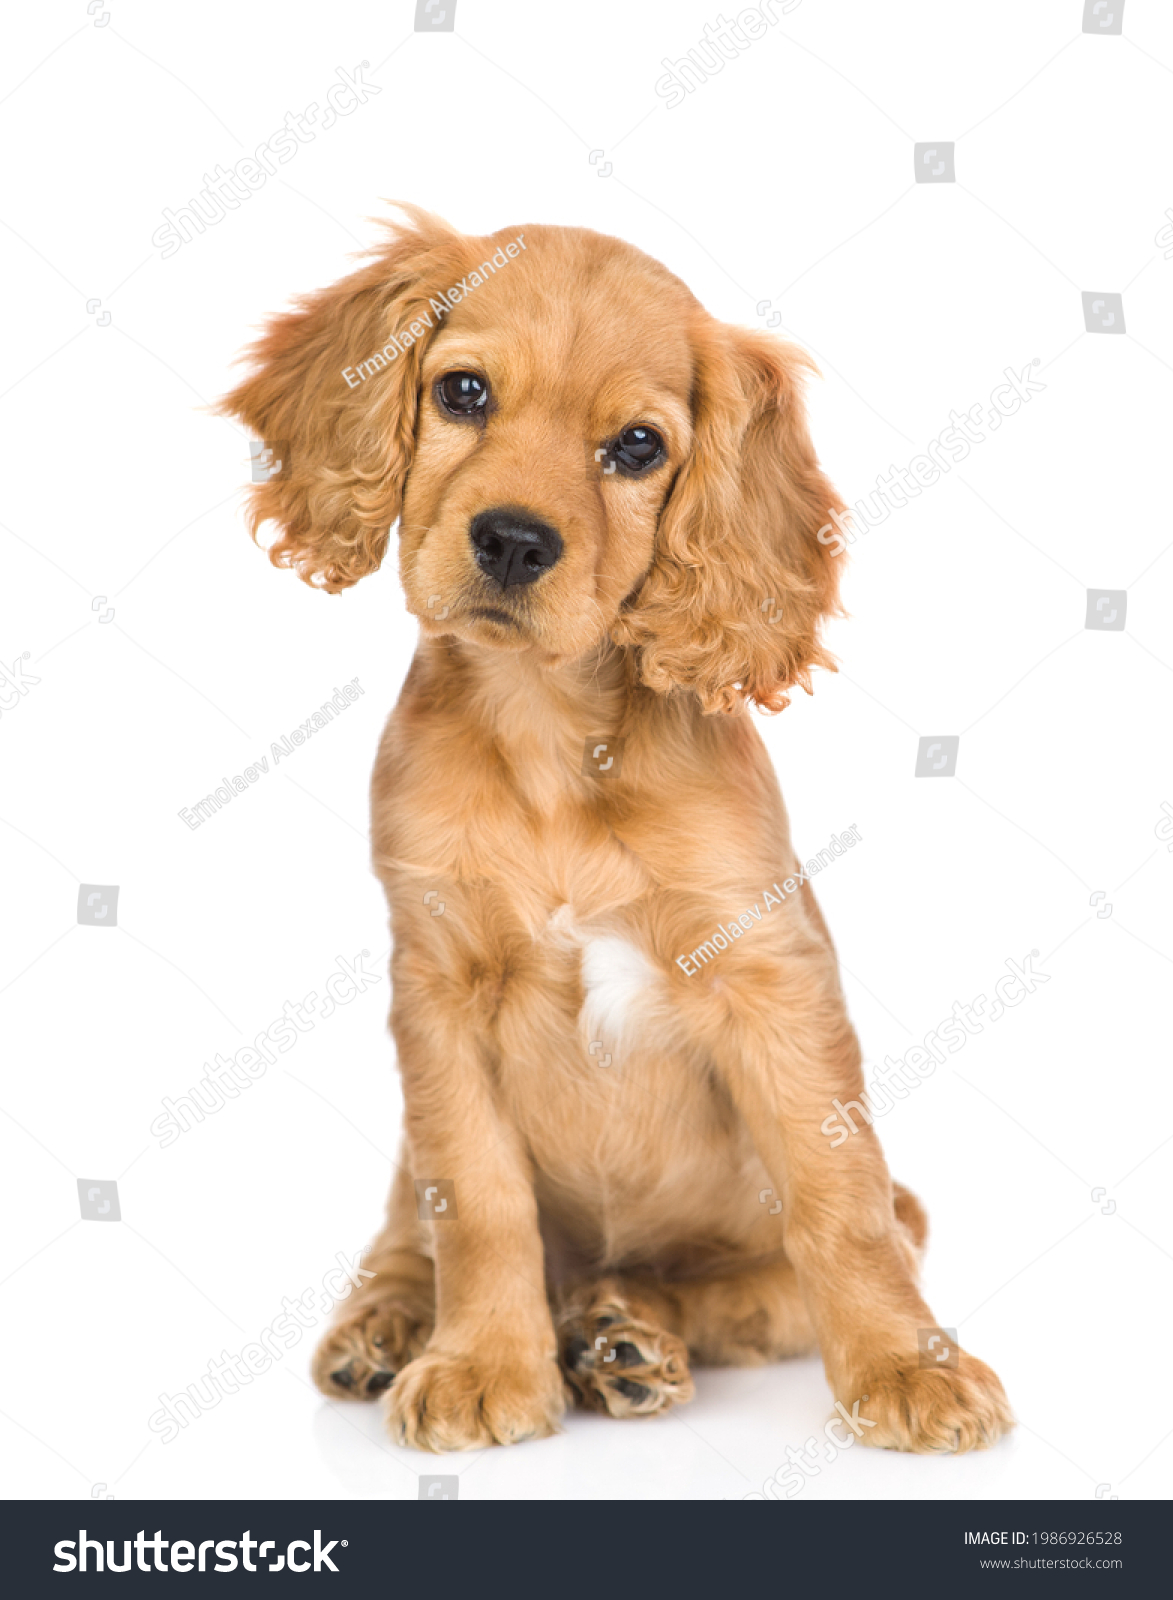 English cocker spaniel puppy sitting in front view and tilting head. isolated on white background #1986926528